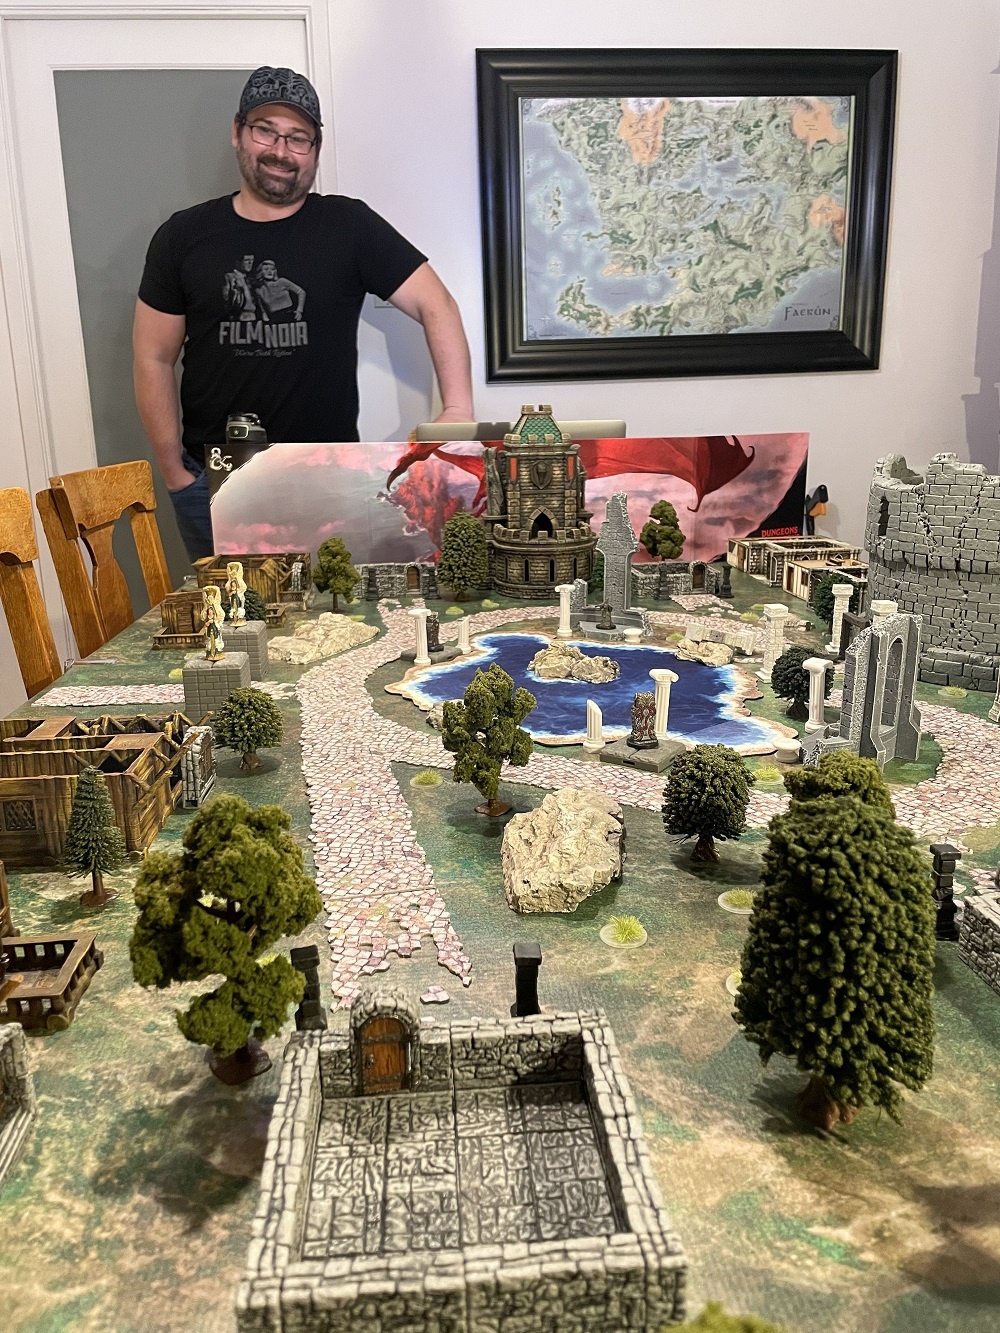 Eric with an elaborate Dungeons & Dragons setup